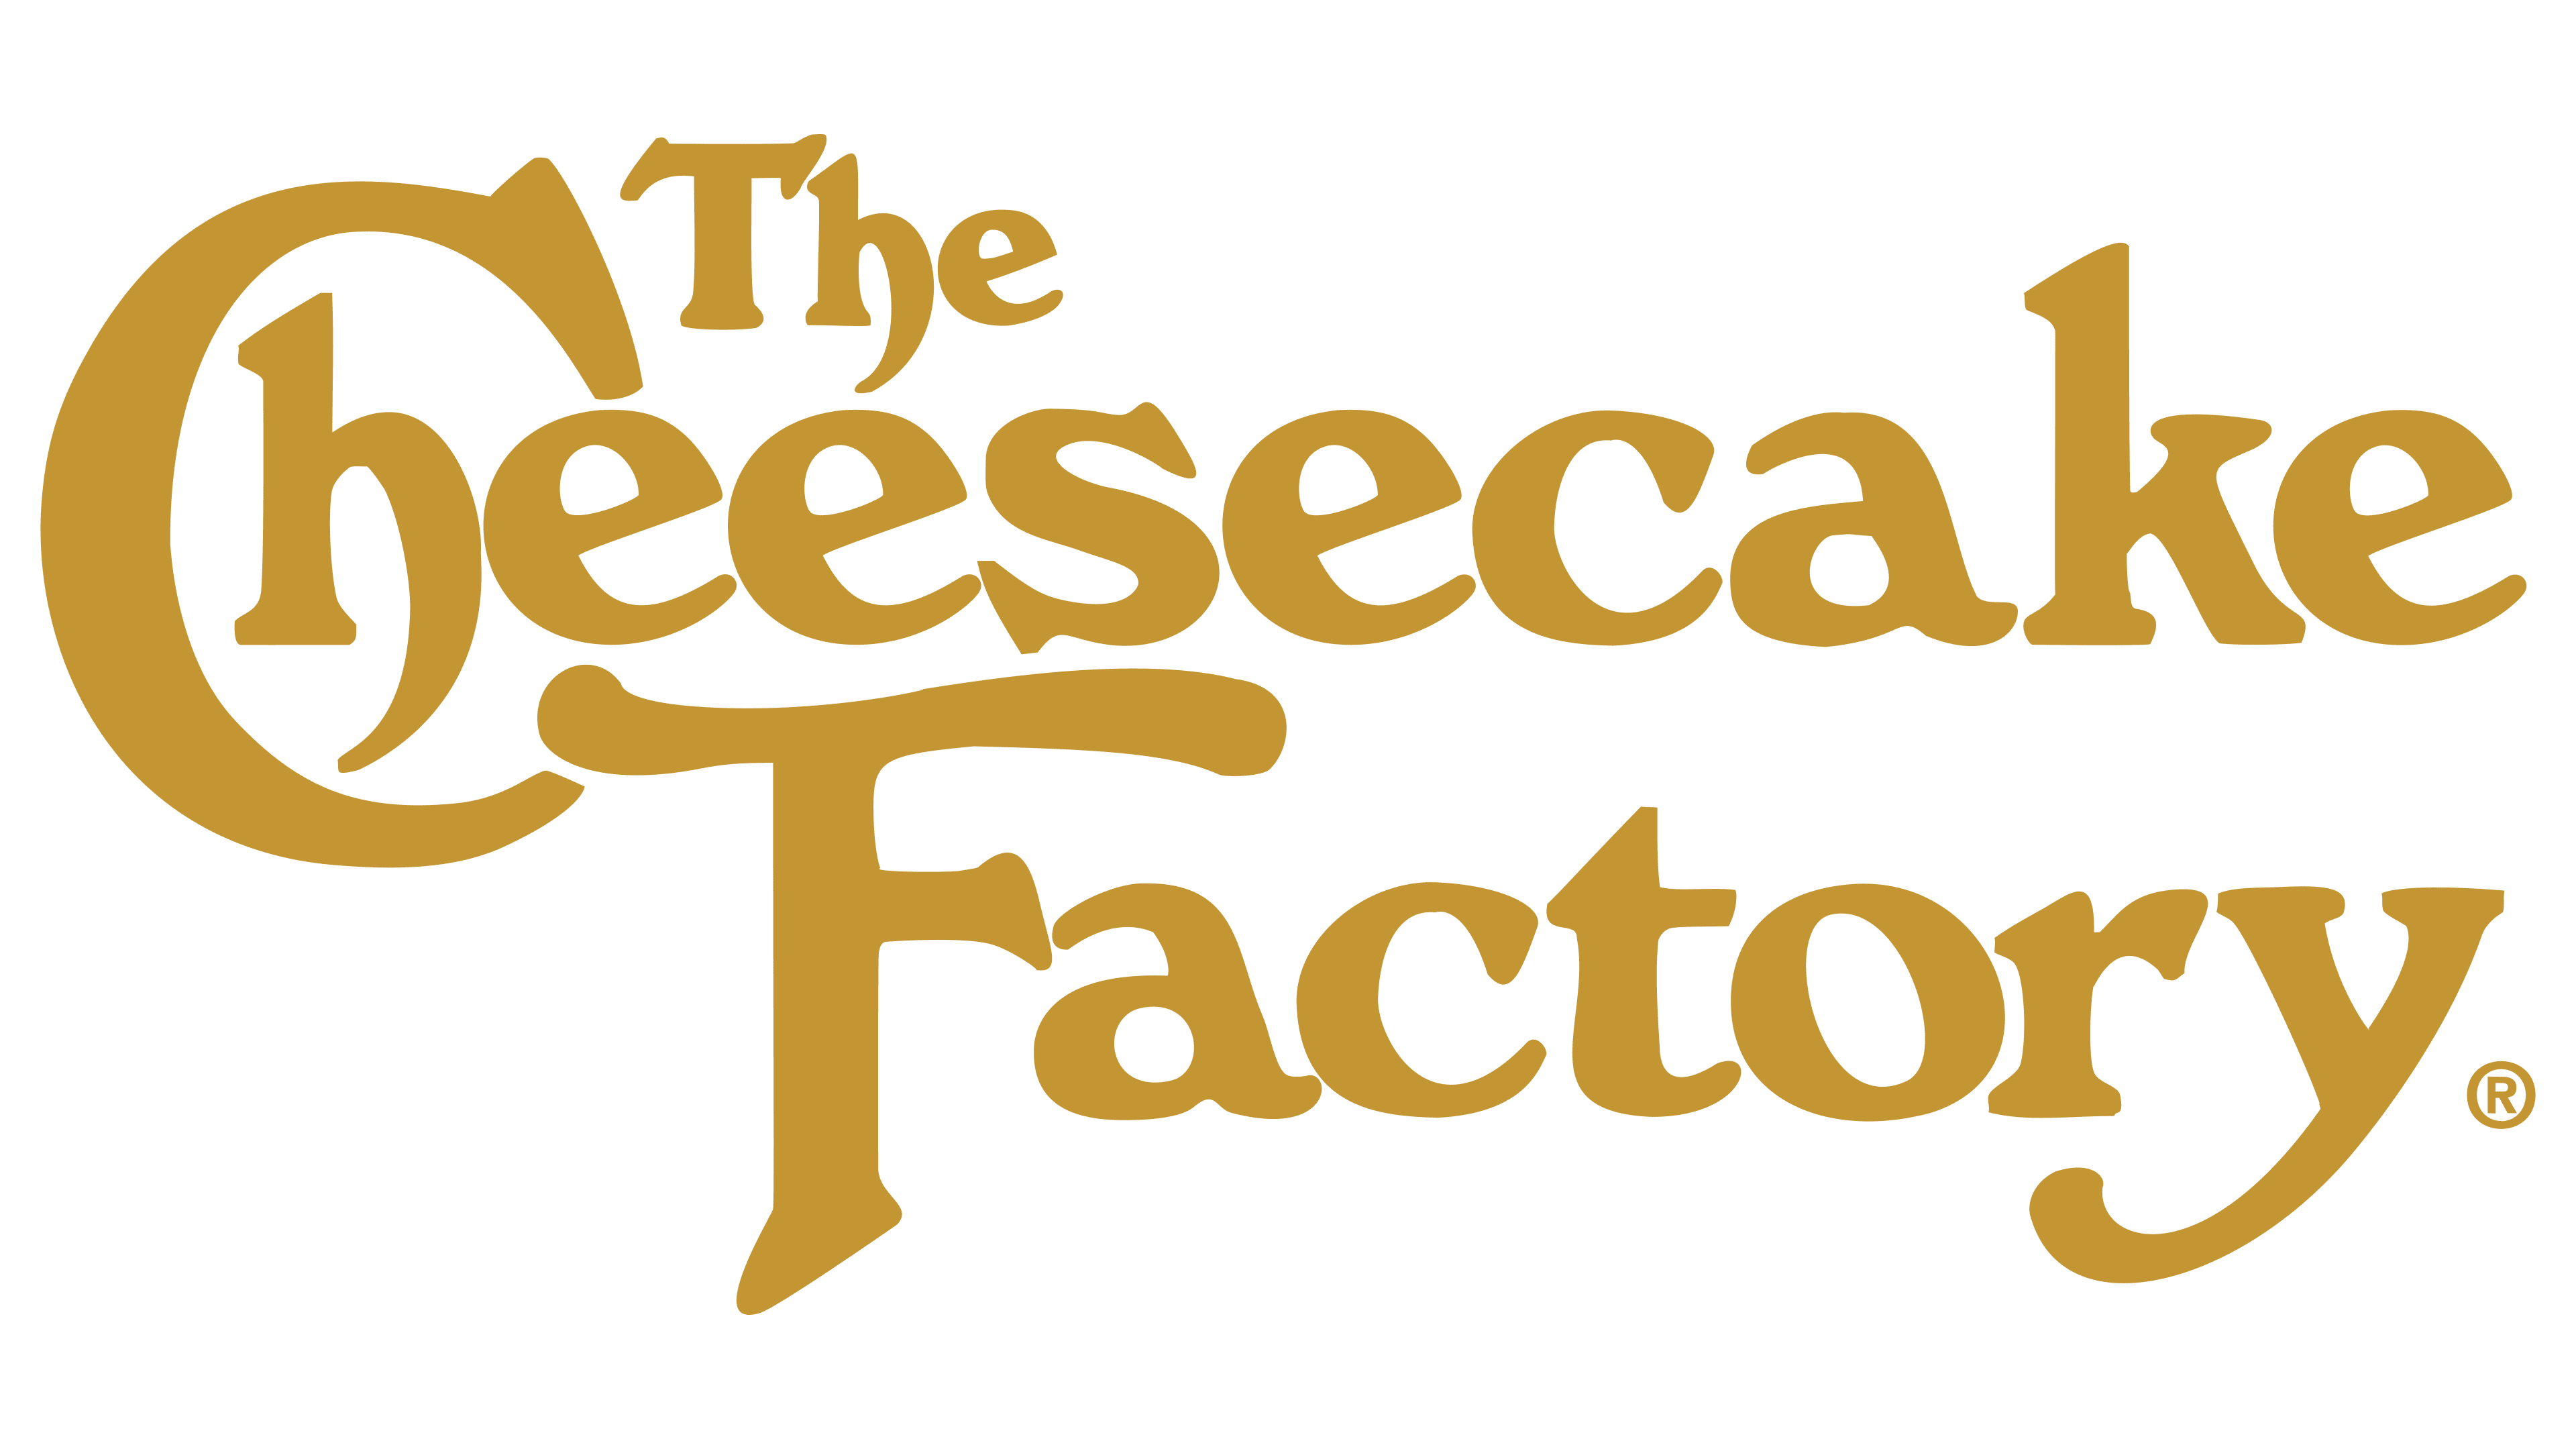 Cheesecake-Factory-Emblem.png